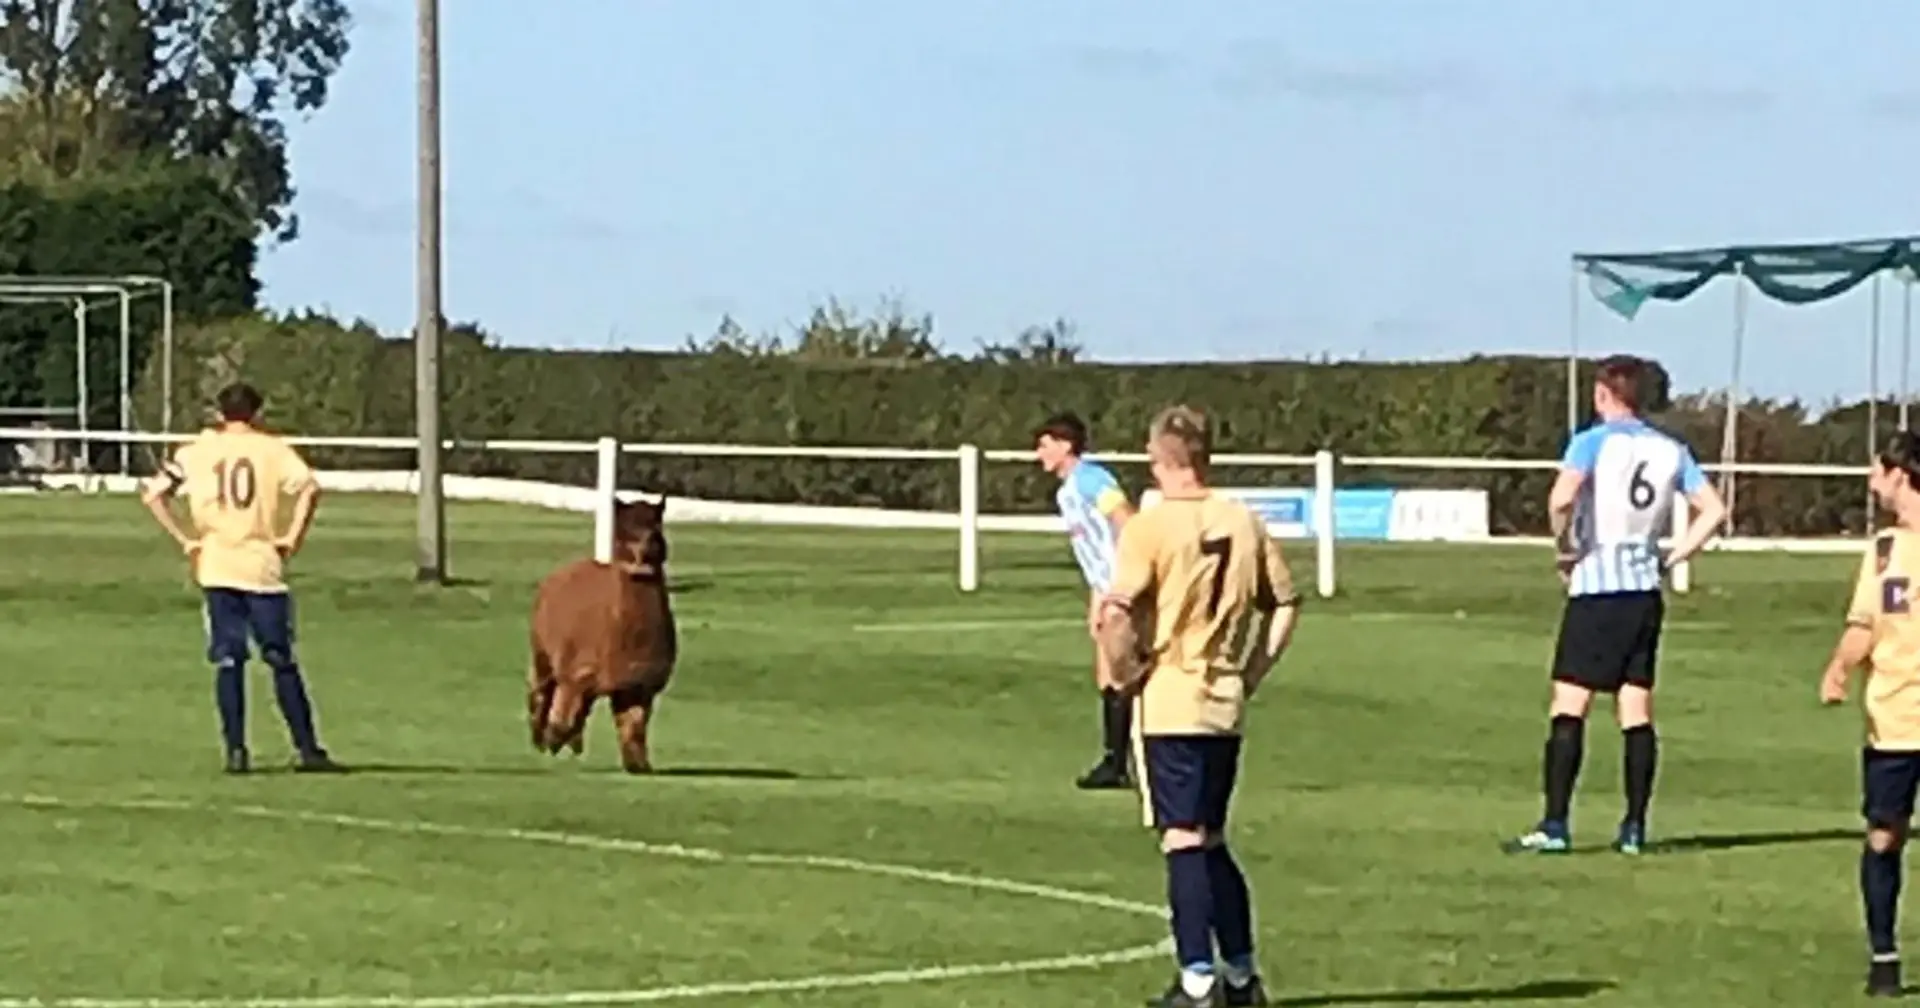 Alpaca named Oscar invades pitch, stops football game in West Yorkshire (video)